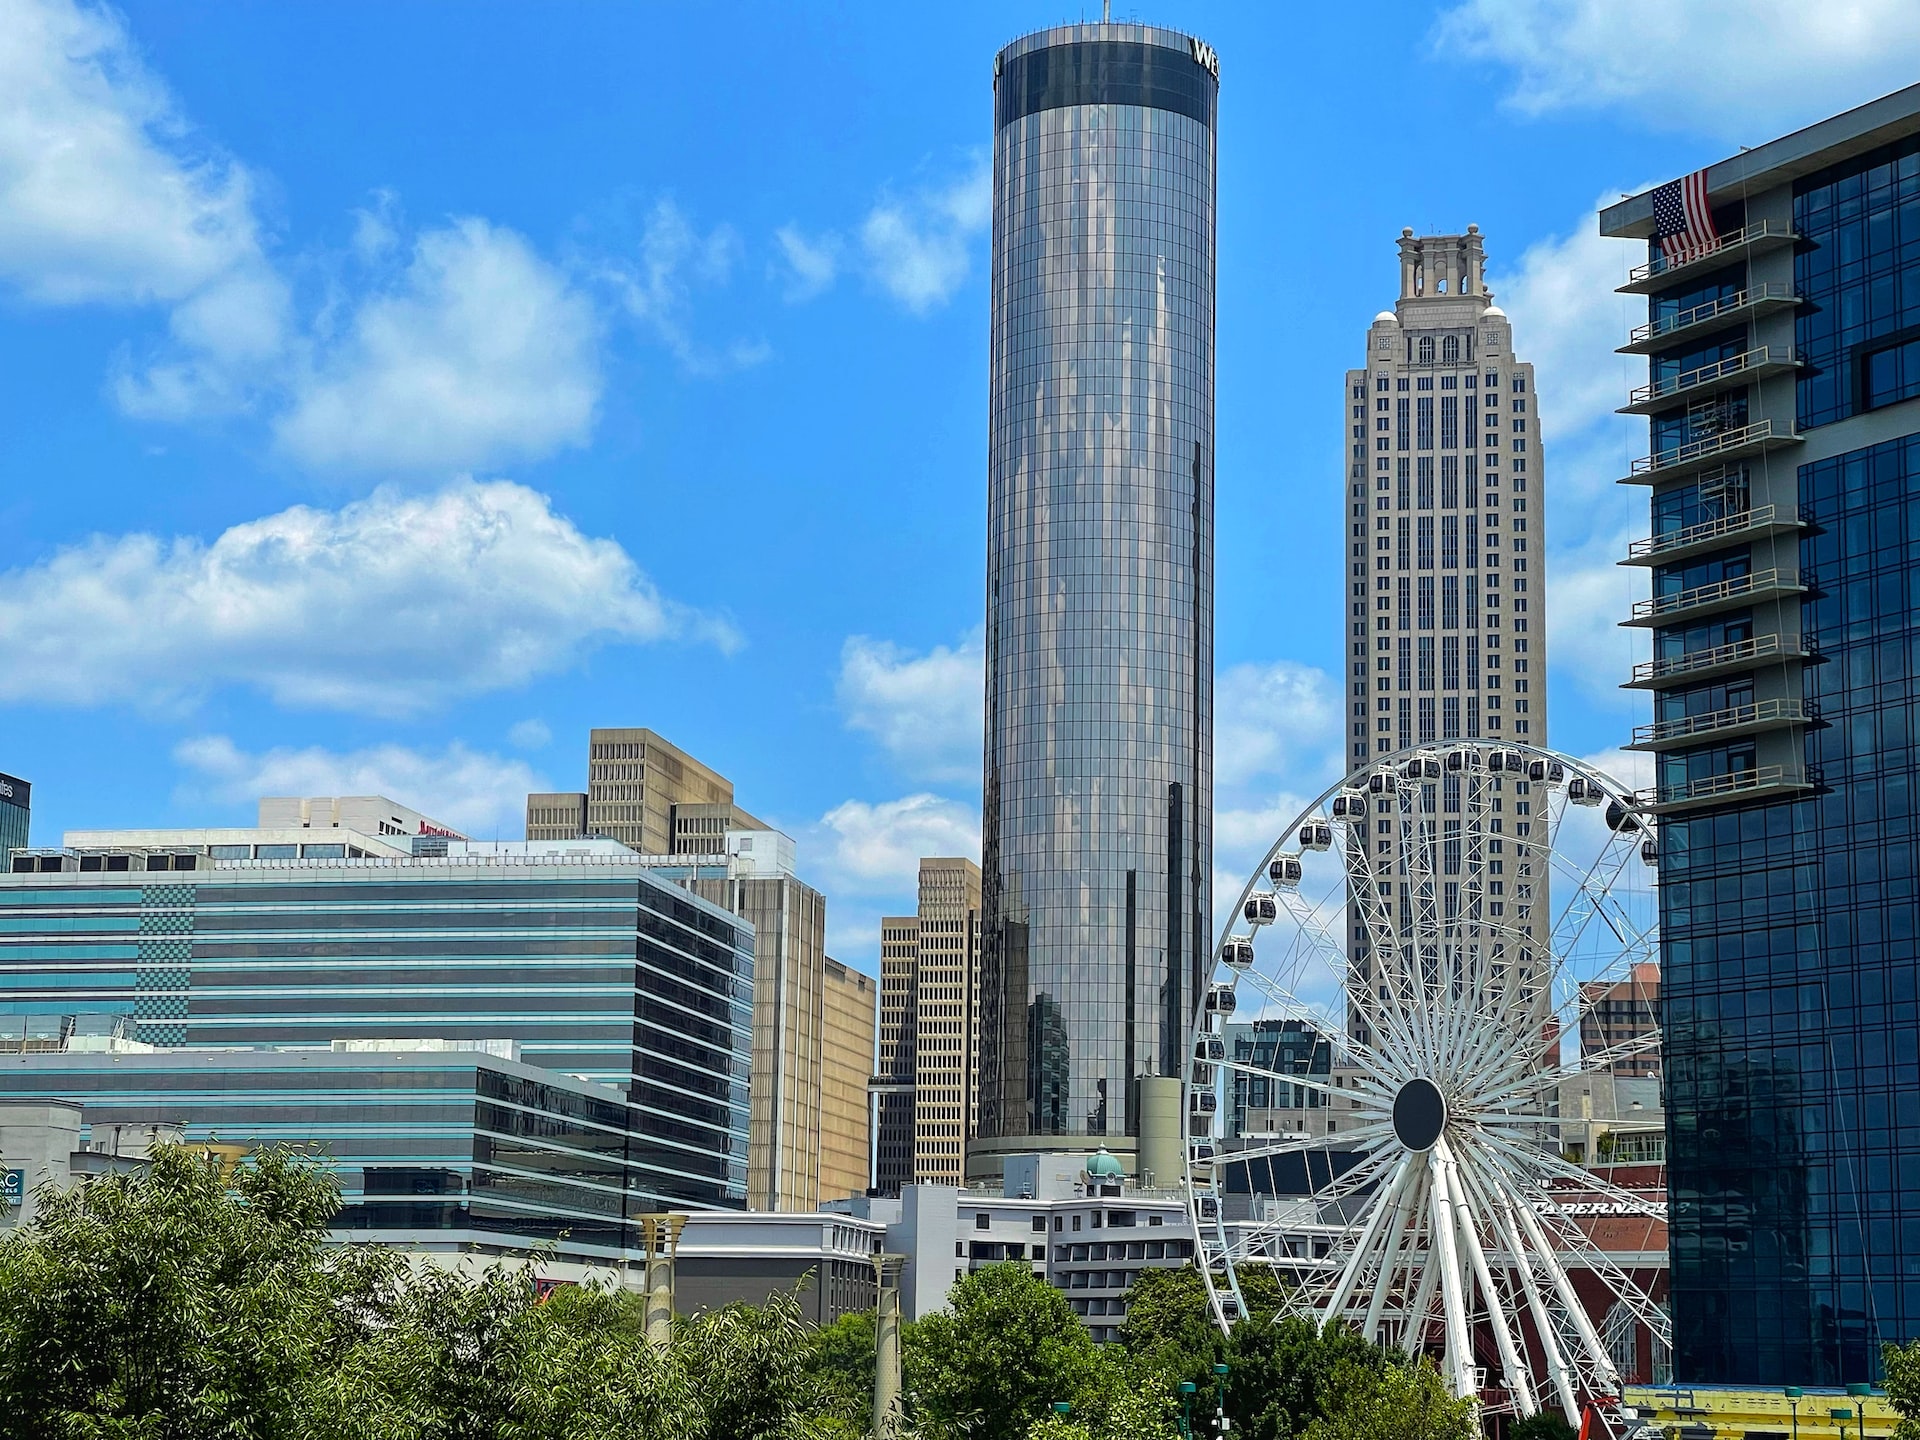 Packed with skyscrapers and attractions, Downtown is Atlanta's busy central business district